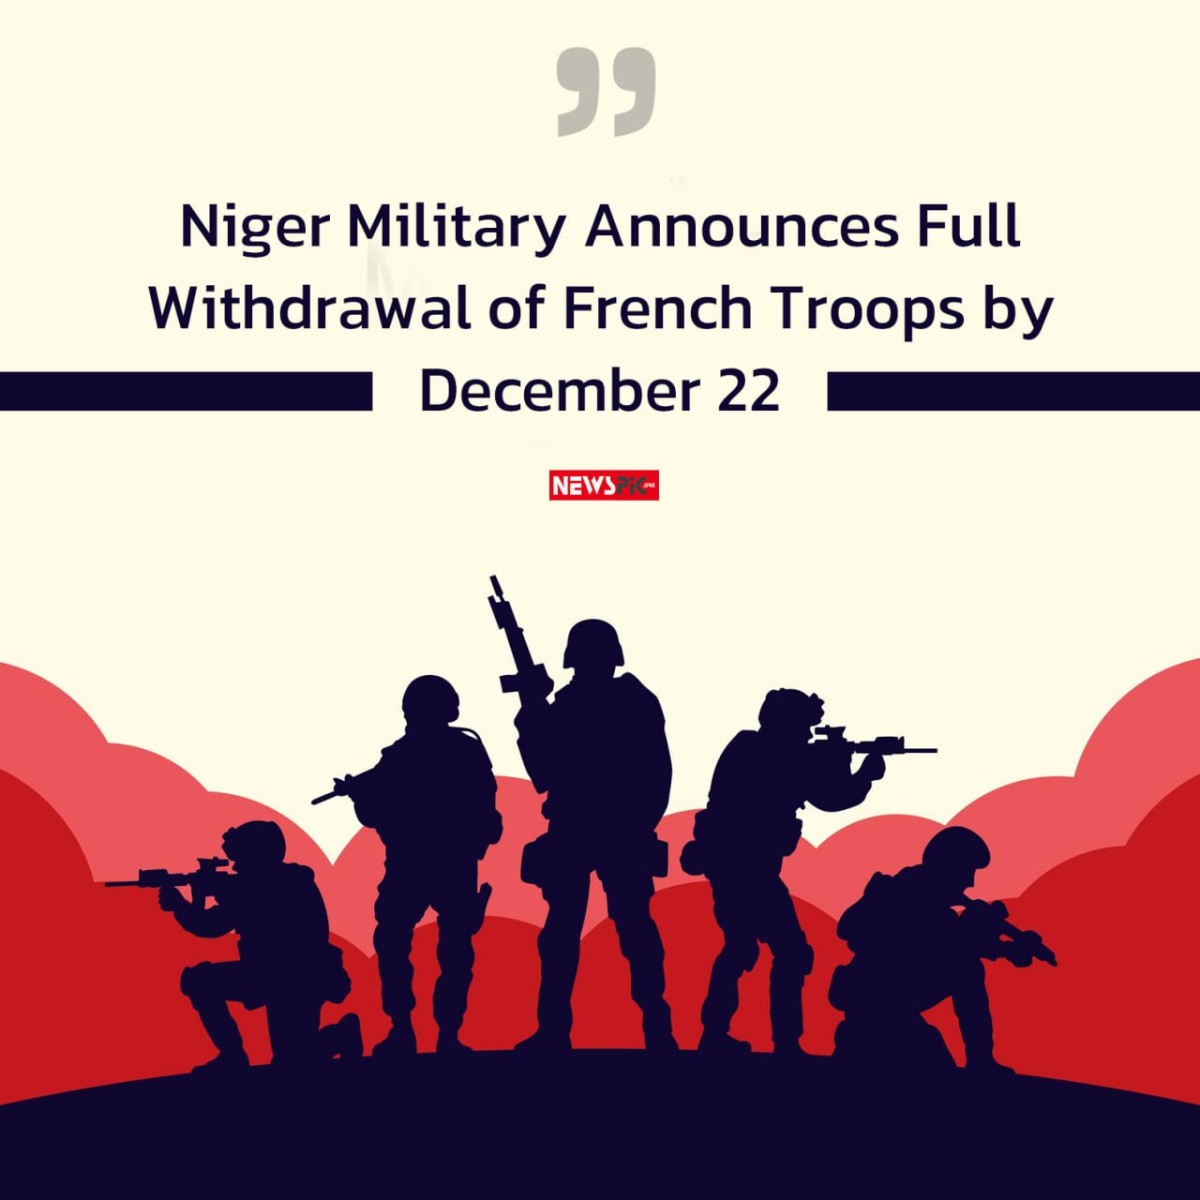 Niger Military Announces Full Withdrawal of French Troops by December 22